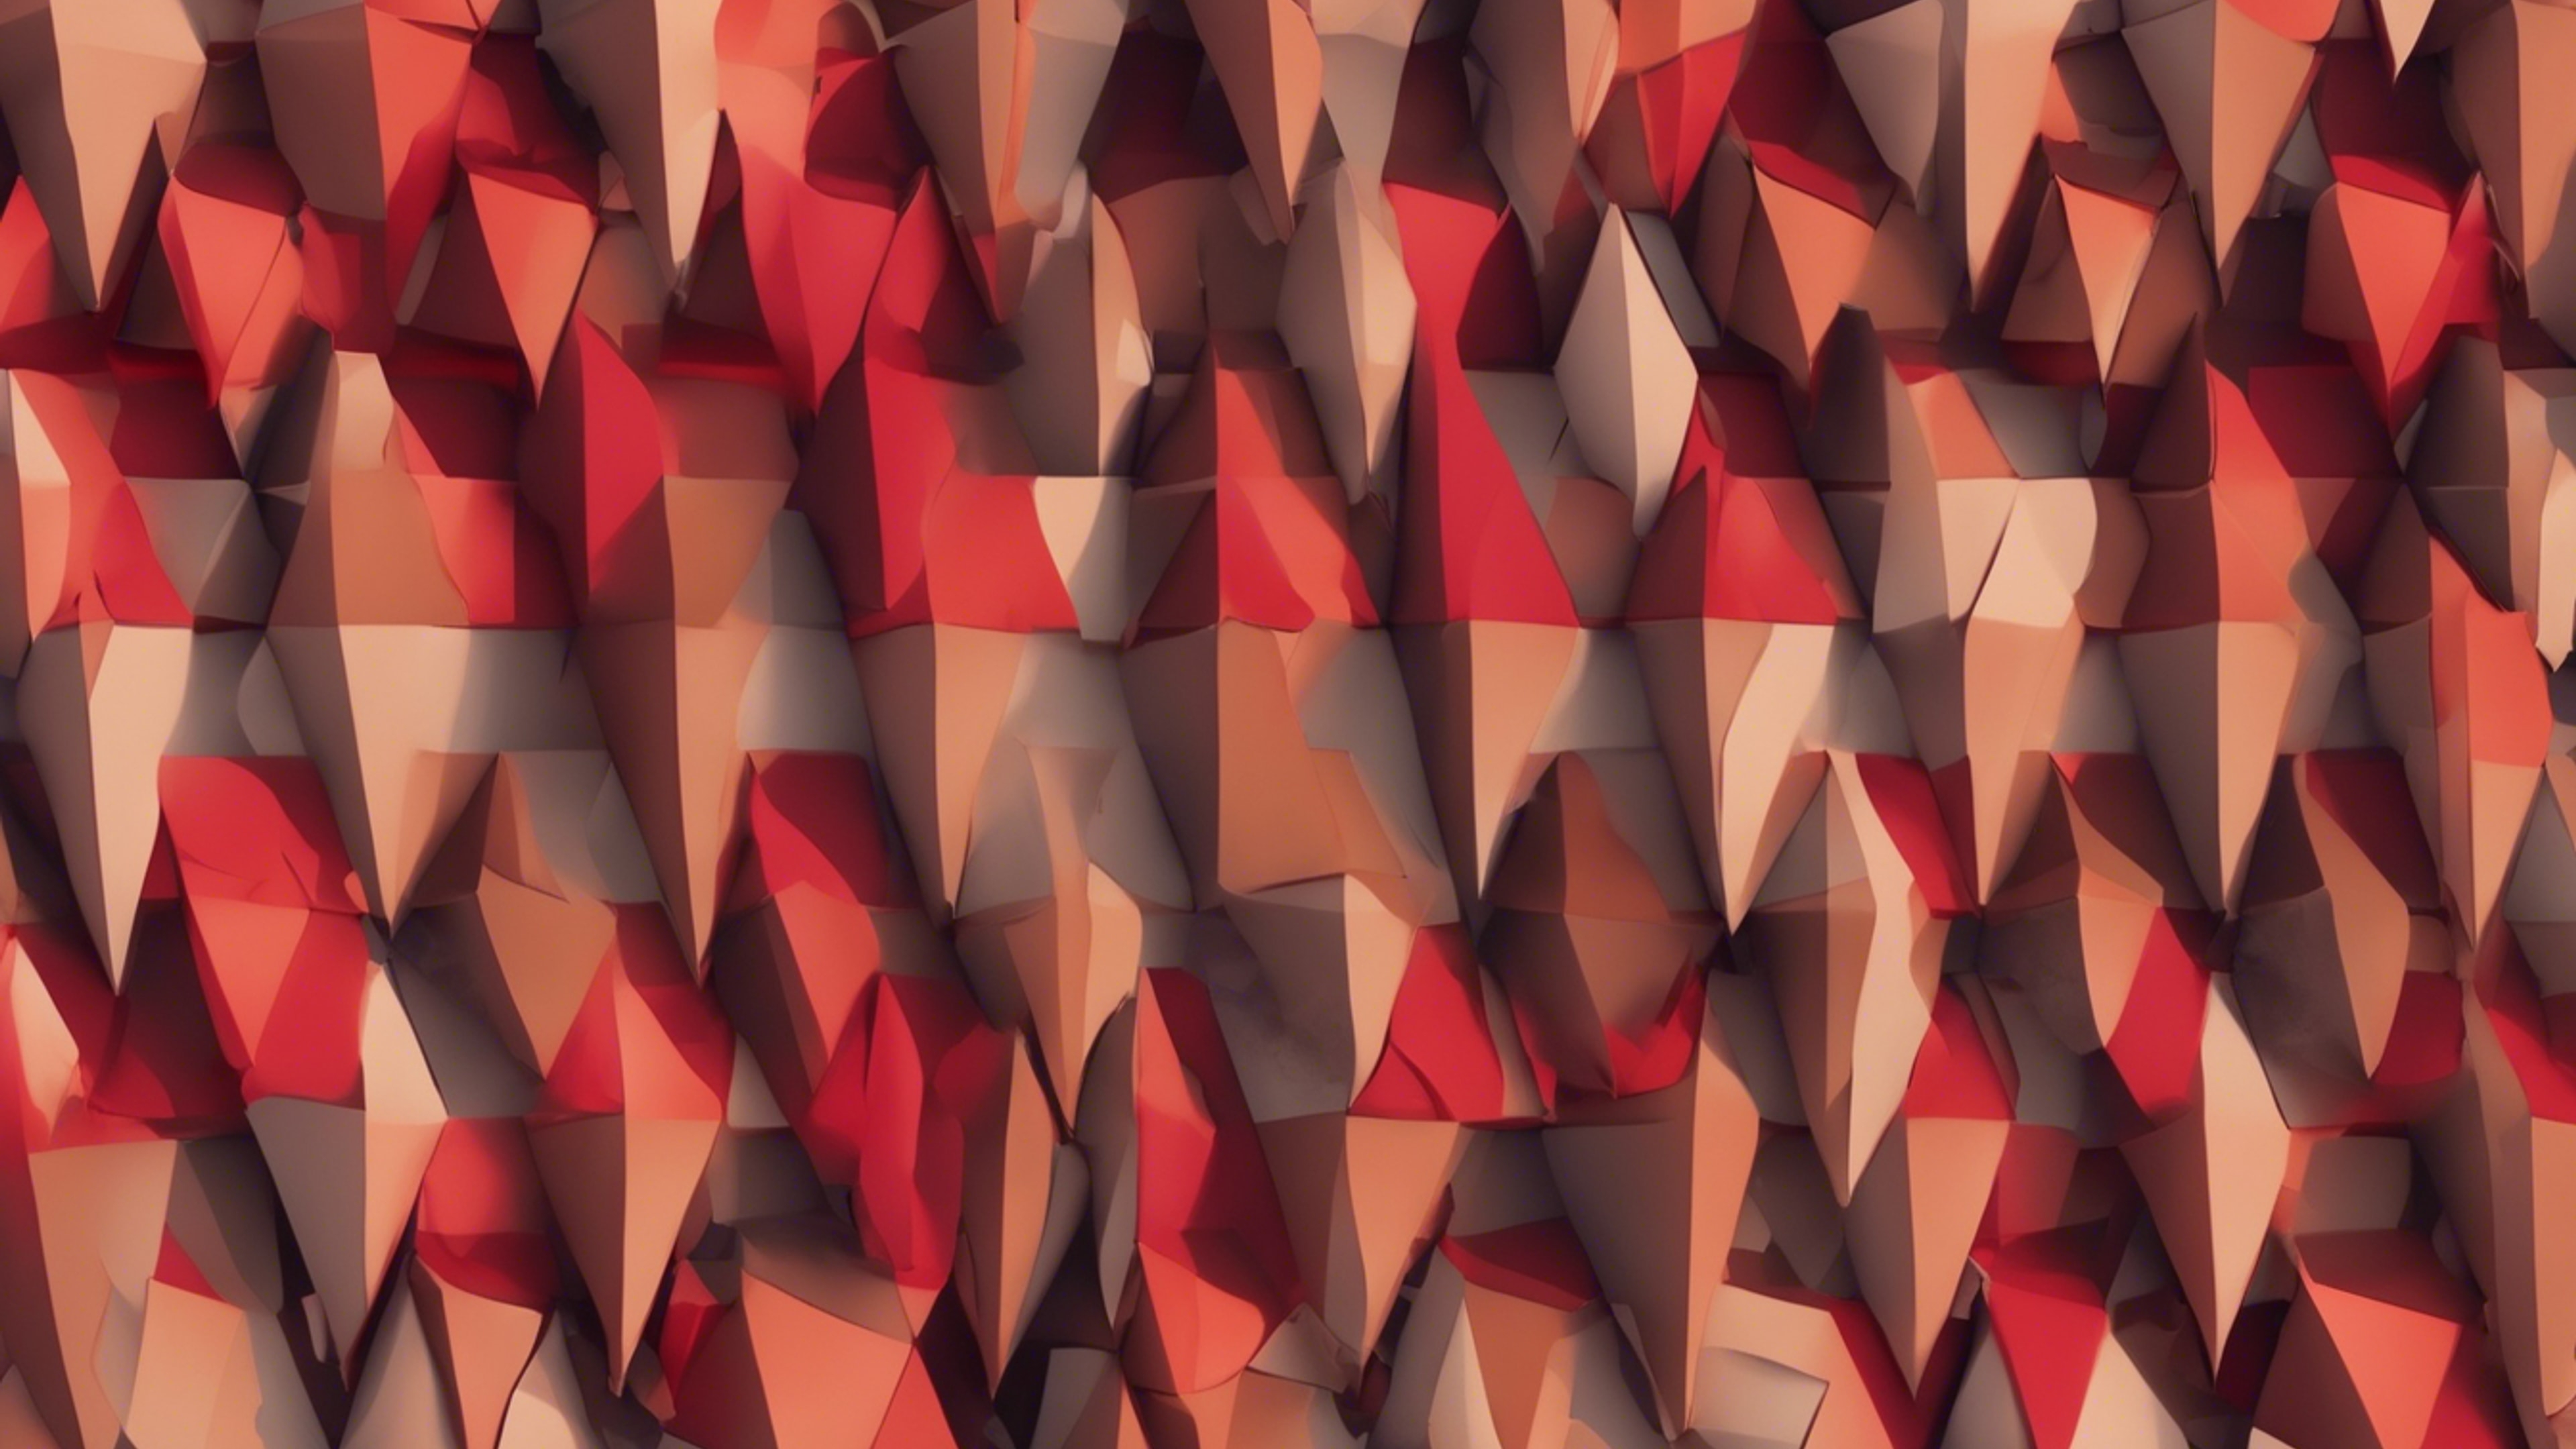 A geometrical abstract pattern consisting of trapeziums in shades of vibrant red and muted brown. Дэлгэцийн зураг[25af3713355d4095863a]